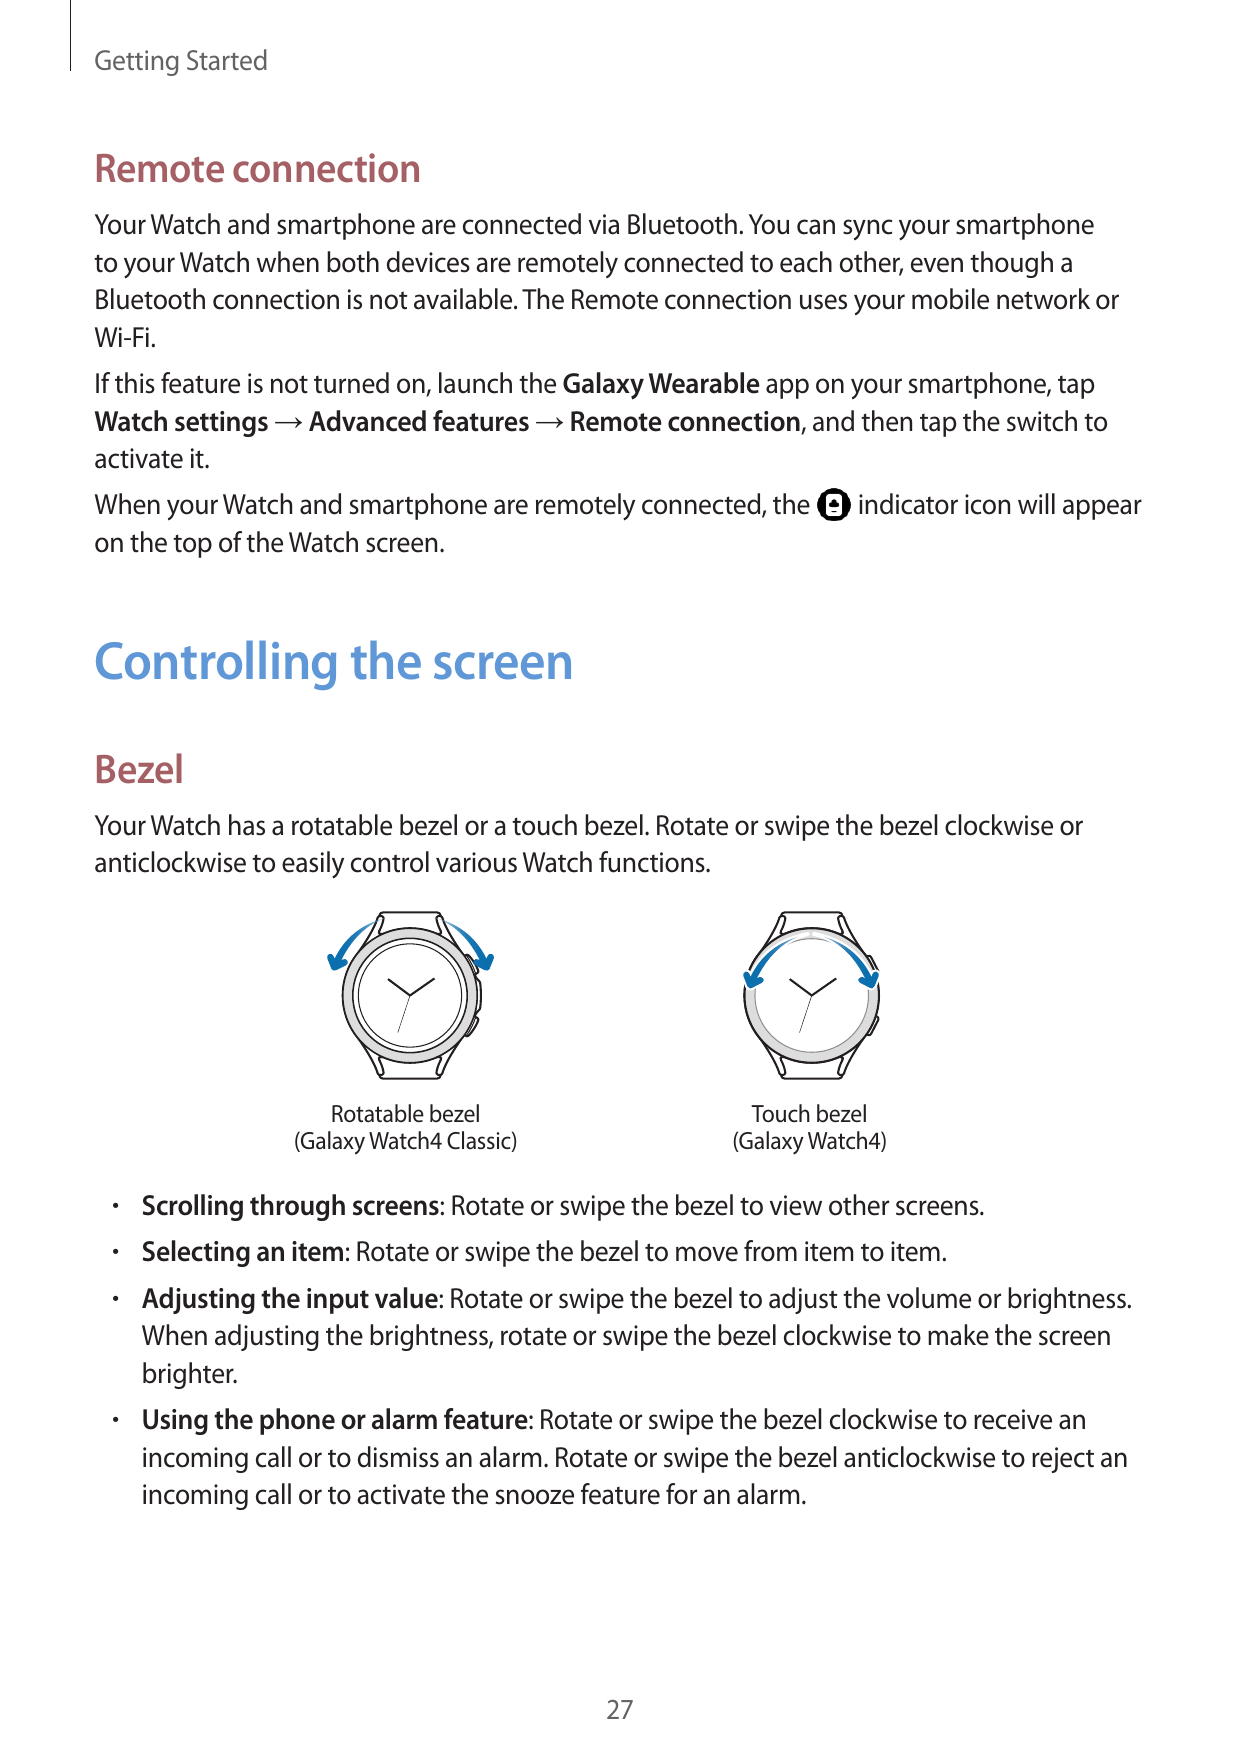 Getting StartedRemote connectionYour Watch and smartphone are connected via Bluetooth. You can sync your smartphoneto your Watch